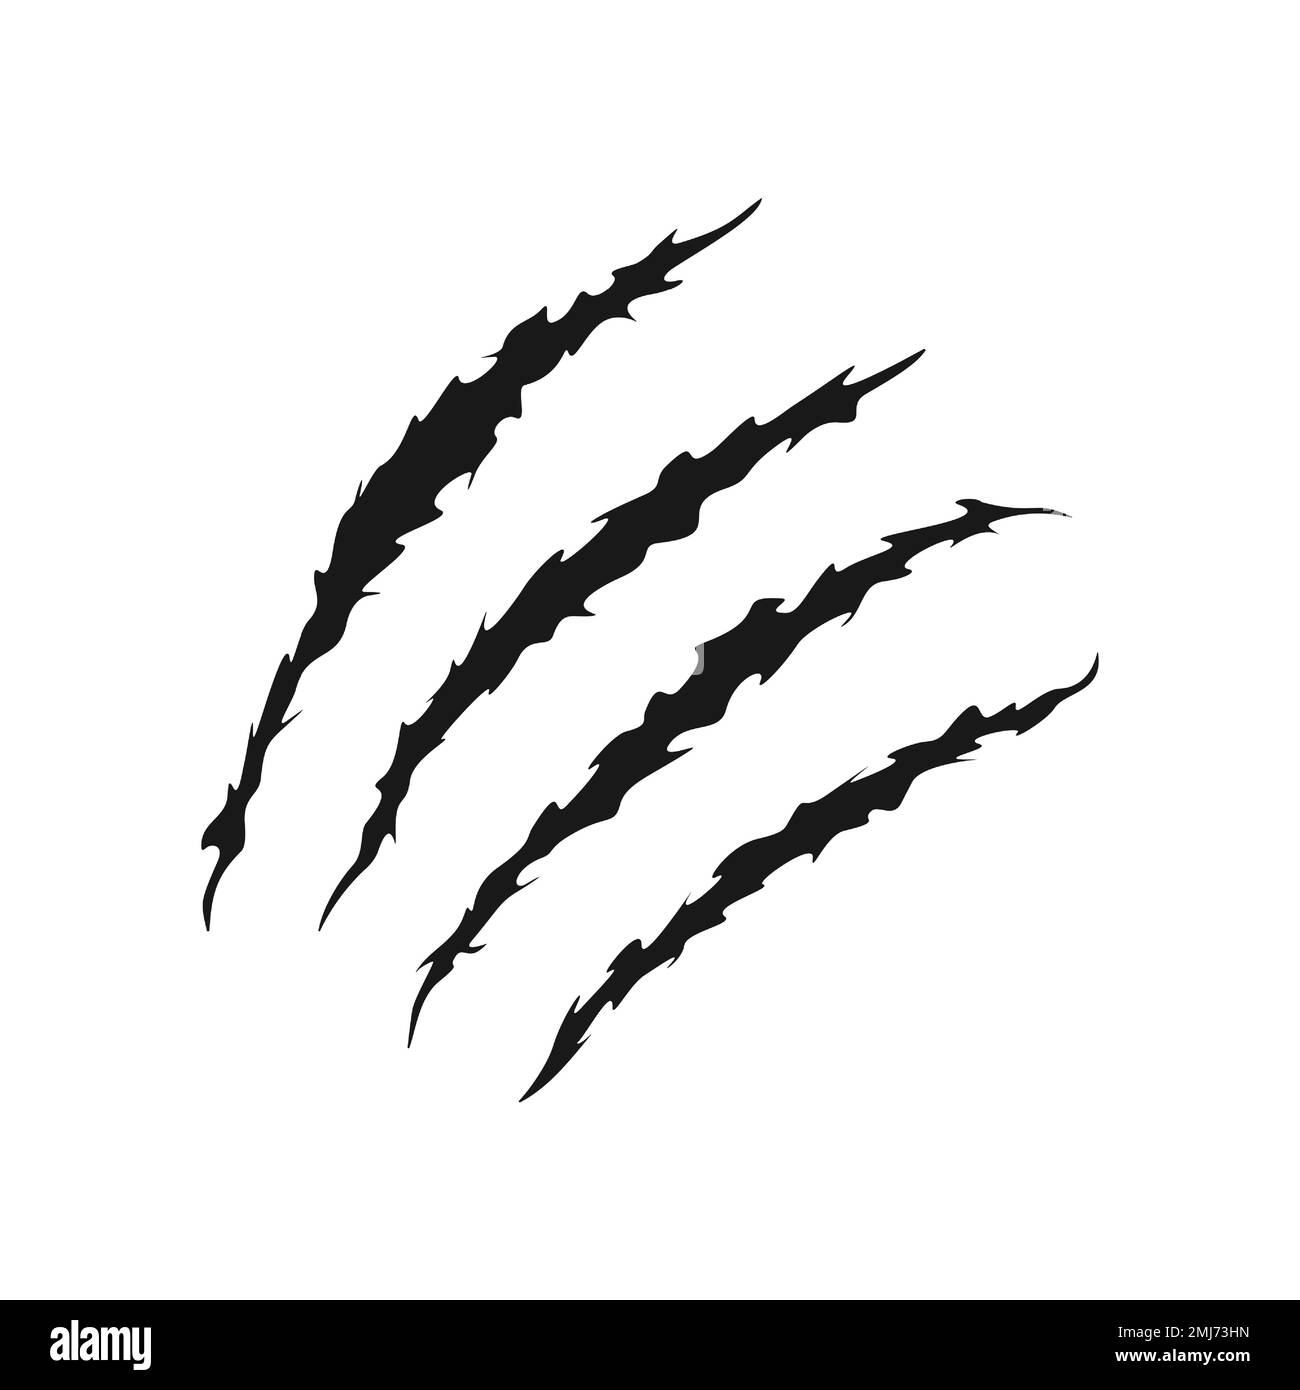 Scratch claws mark icon. Trace of wild animal, monster or dinosaur talons. Sharp torn edges texture isolated on white background. Scary horror symbol. Laceration print. Vector graphic illustration Stock Vector